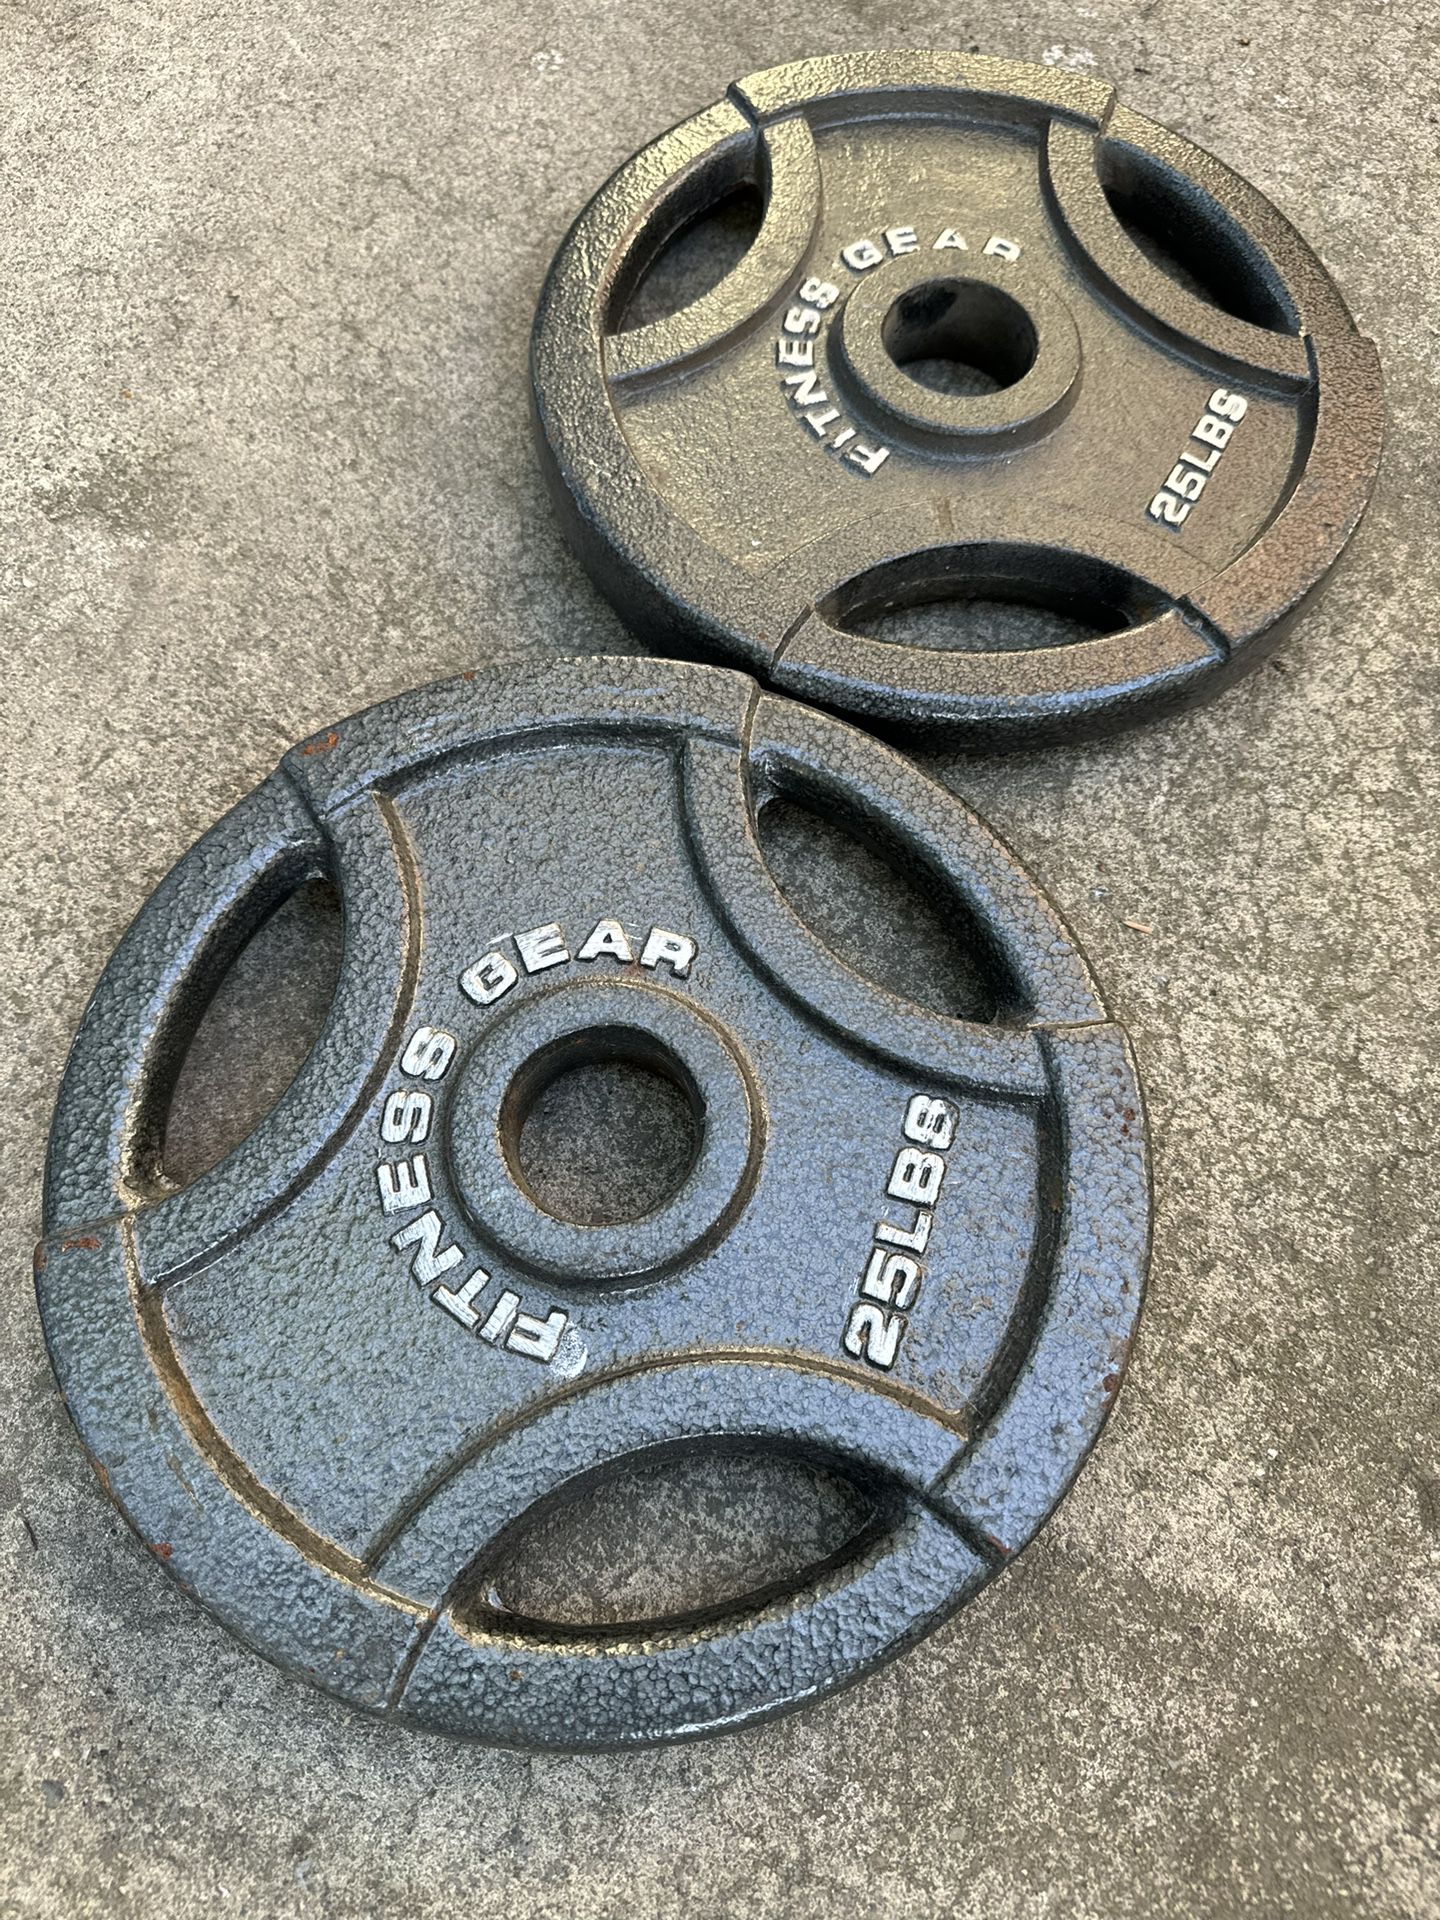 Pair Of 25 Pound Fitness Gear Olympic Weights